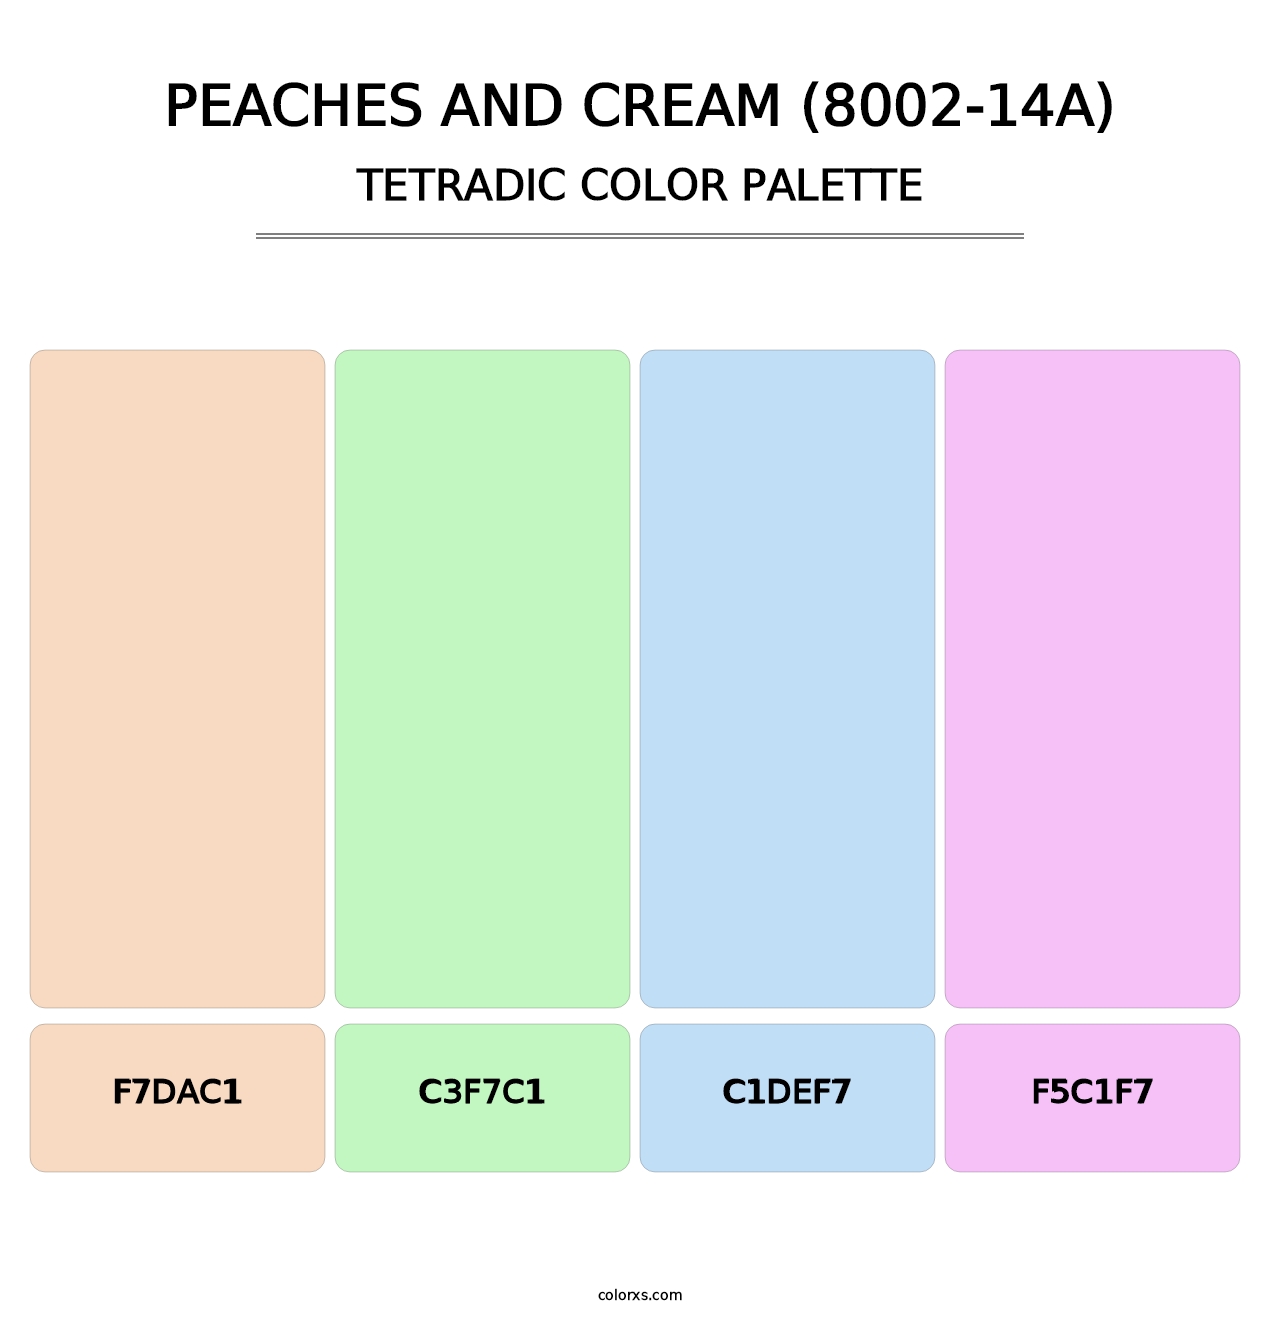 Peaches and Cream (8002-14A) - Tetradic Color Palette